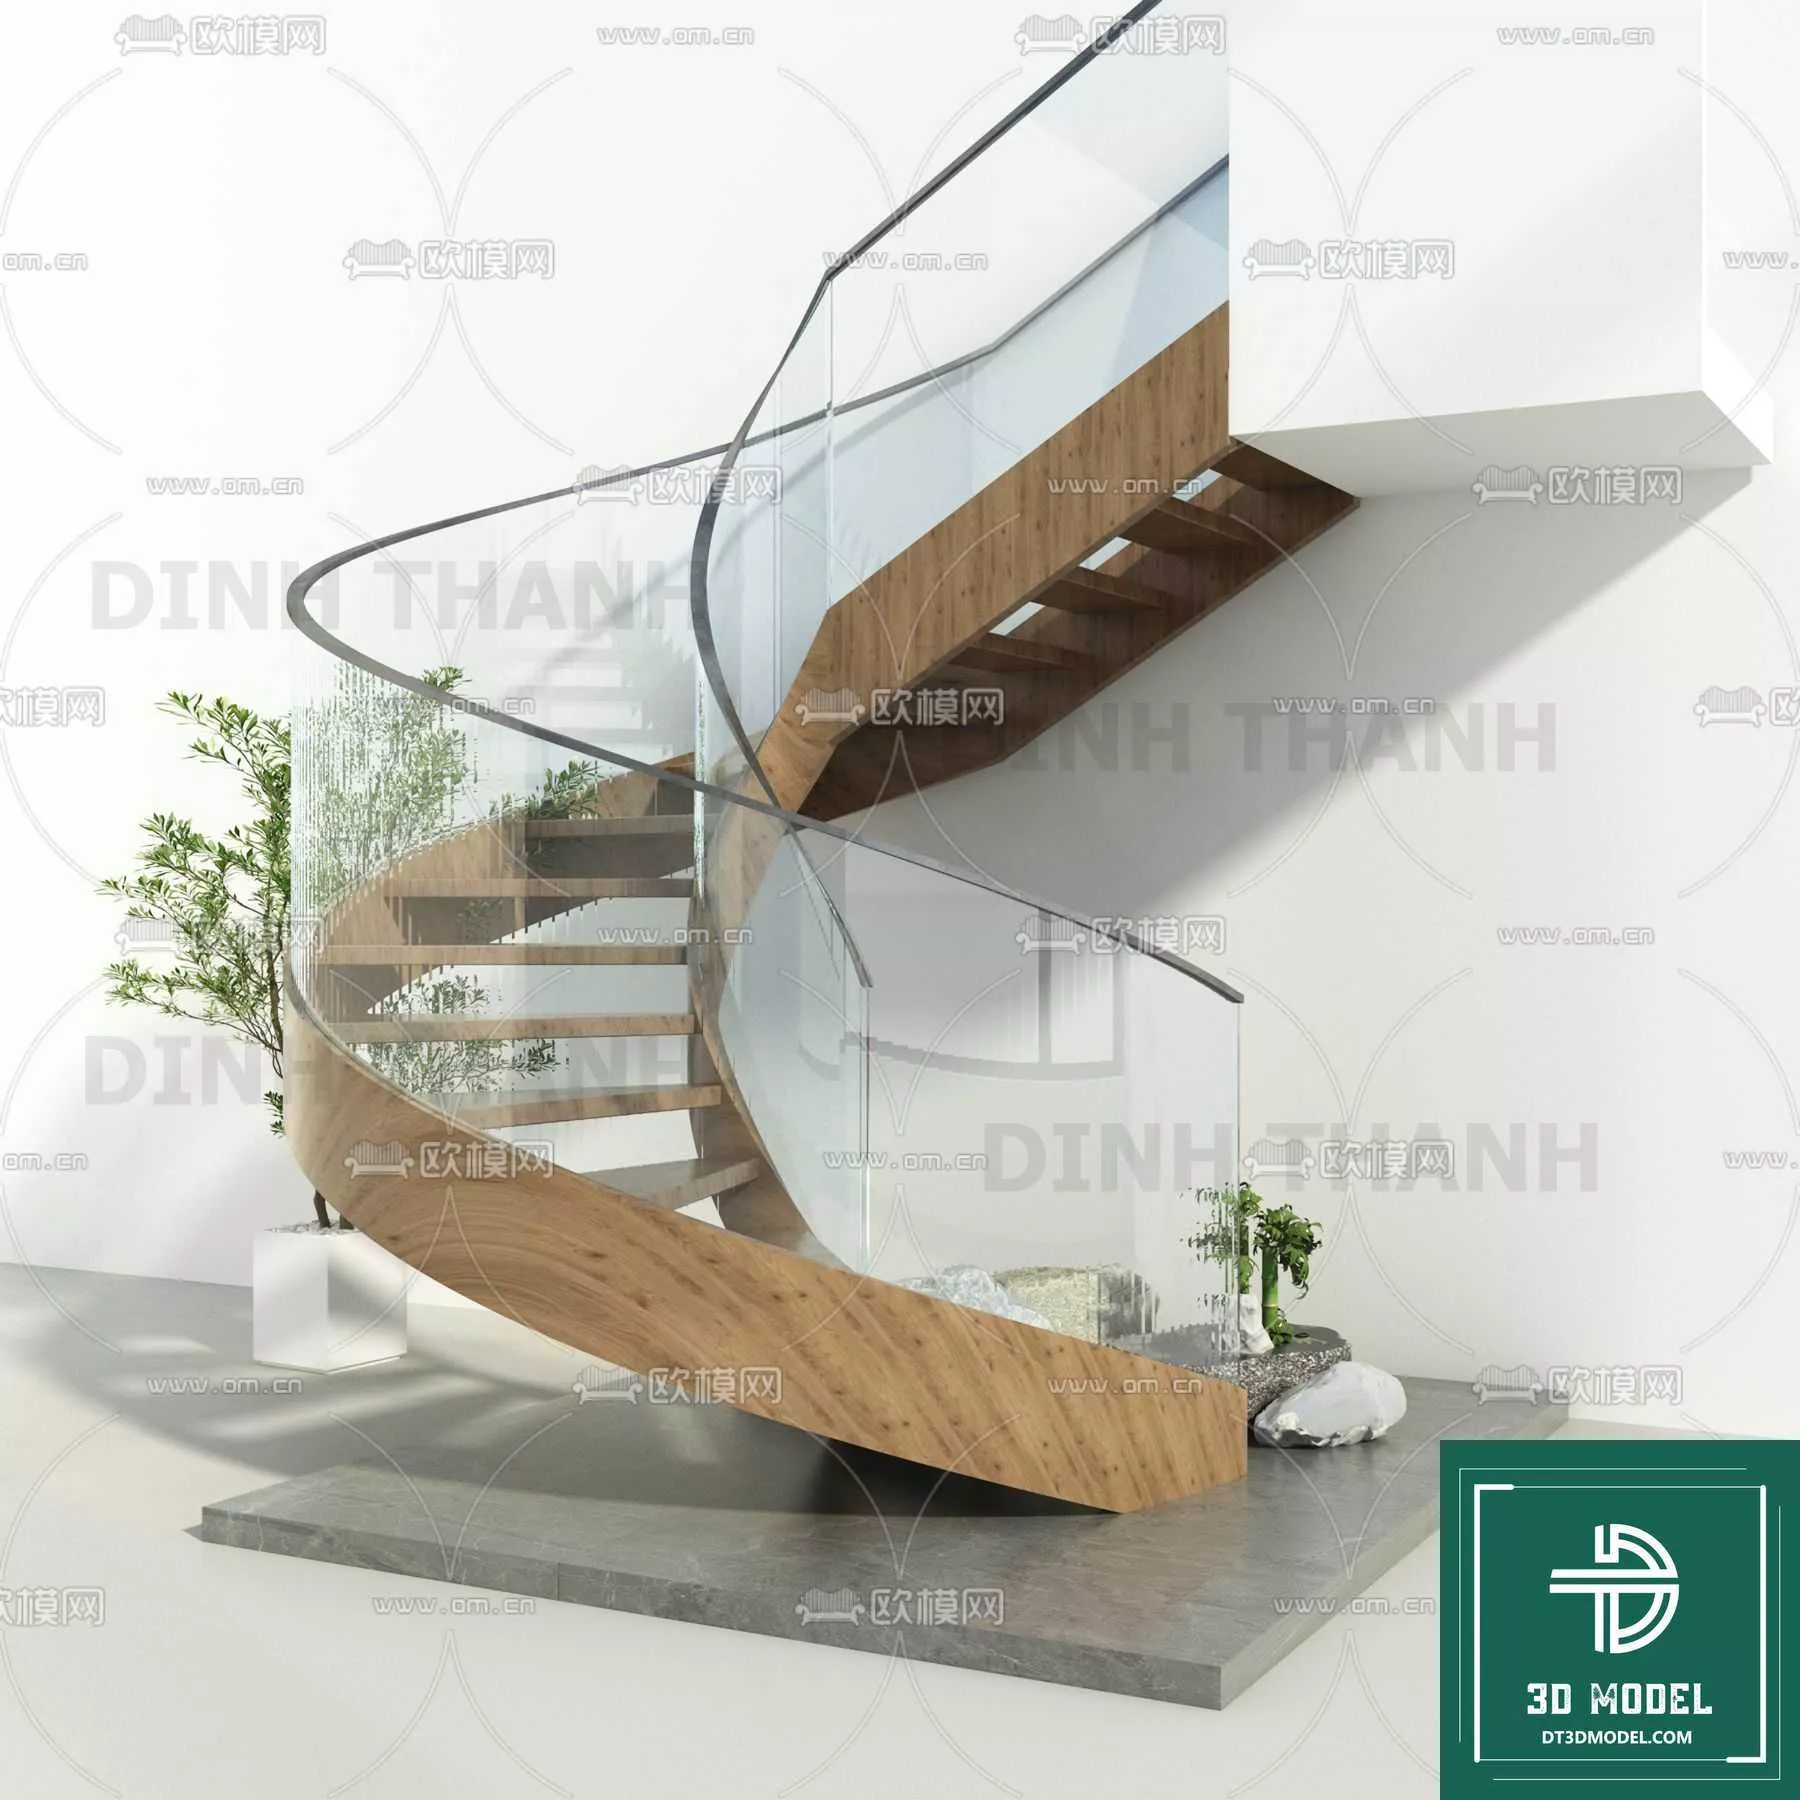 MODERN STAIR - SKETCHUP 3D MODEL - VRAY OR ENSCAPE - ID14212